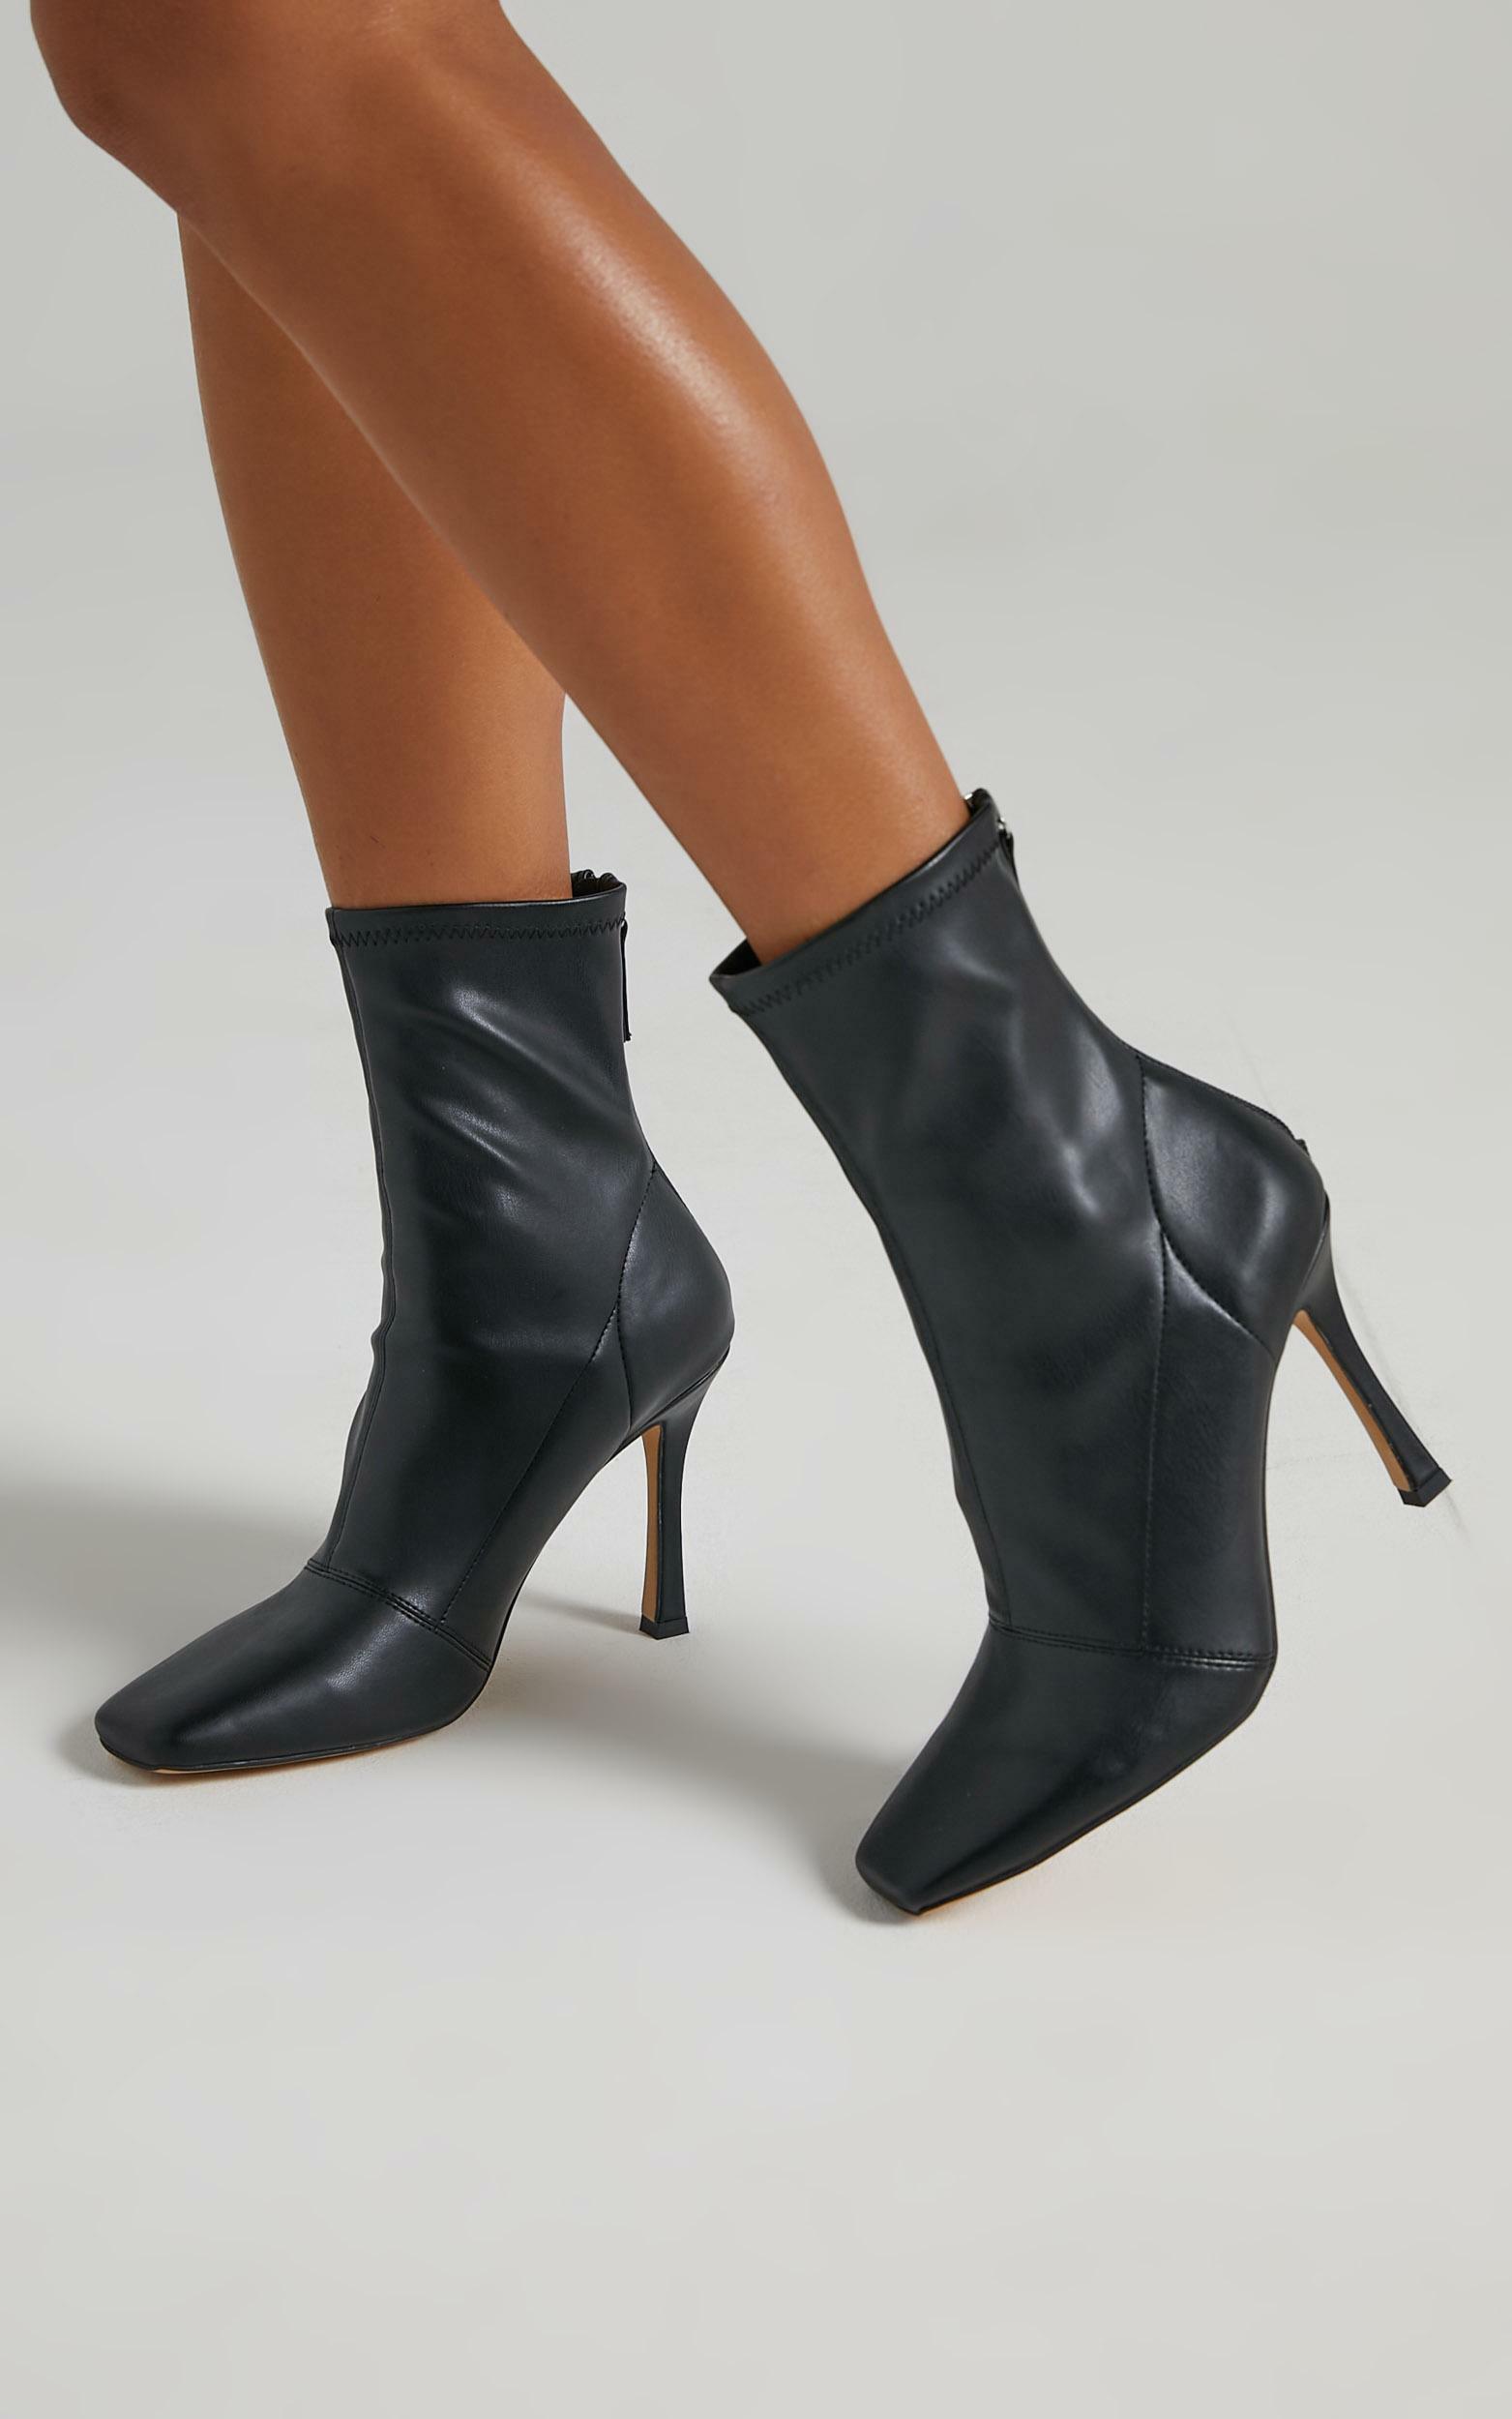 Therapy - Yasmeen Boots in Black - 05, BLK1, hi-res image number null